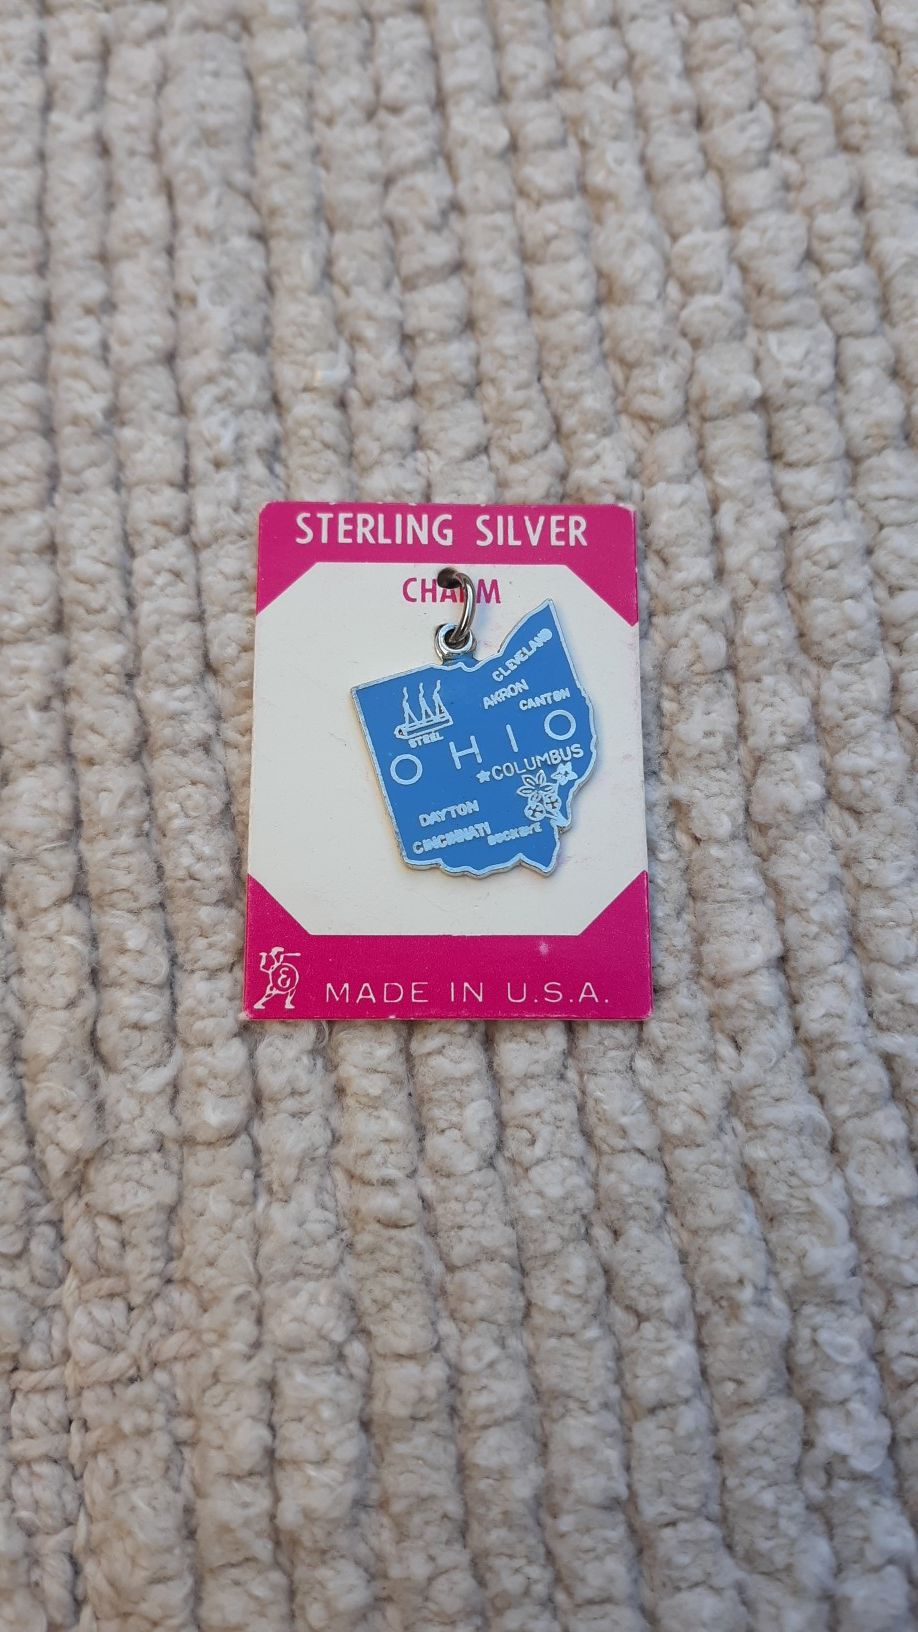 Ohio Vintage Sterling Silver Charm